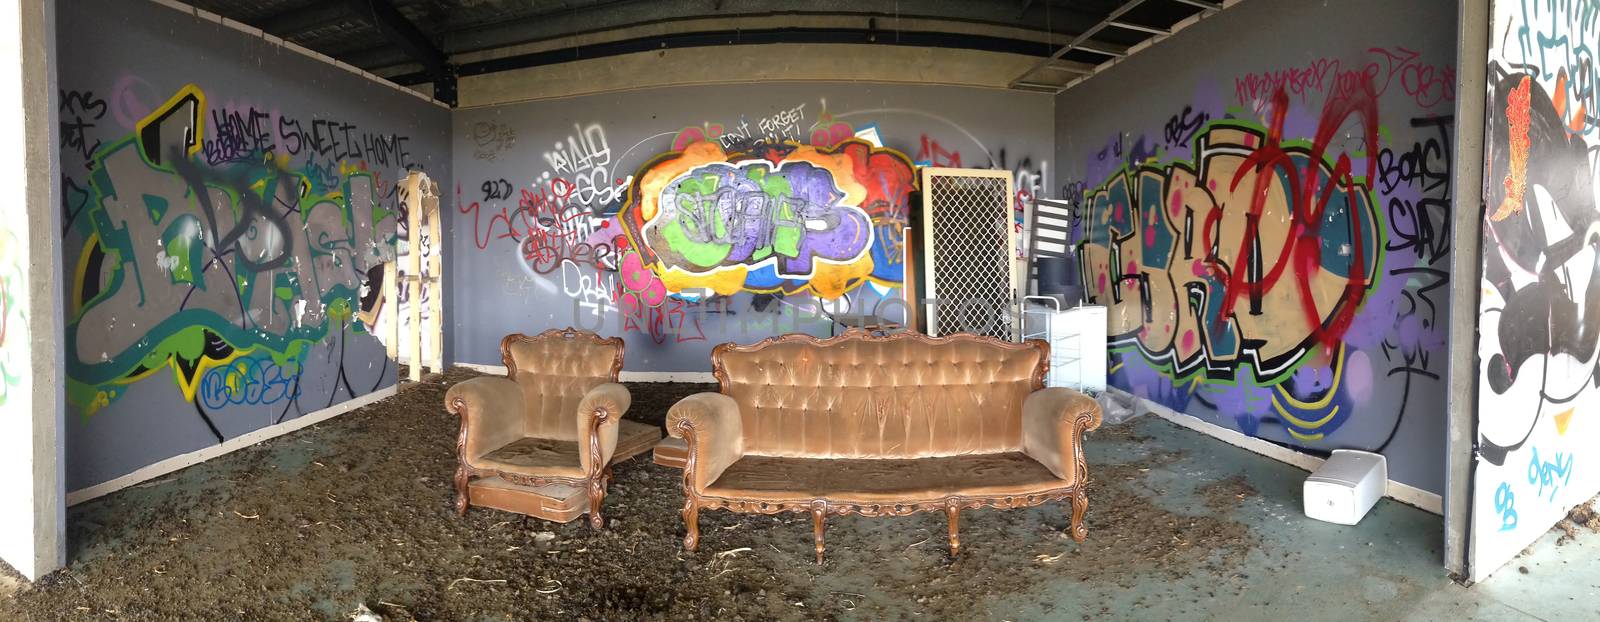 Abandoned building showing grafitti, willful damage, vandalism and destruction.  A retro gold velour sofa sits in the room with an upturned rubbish bin, unhinged screen door and other things.